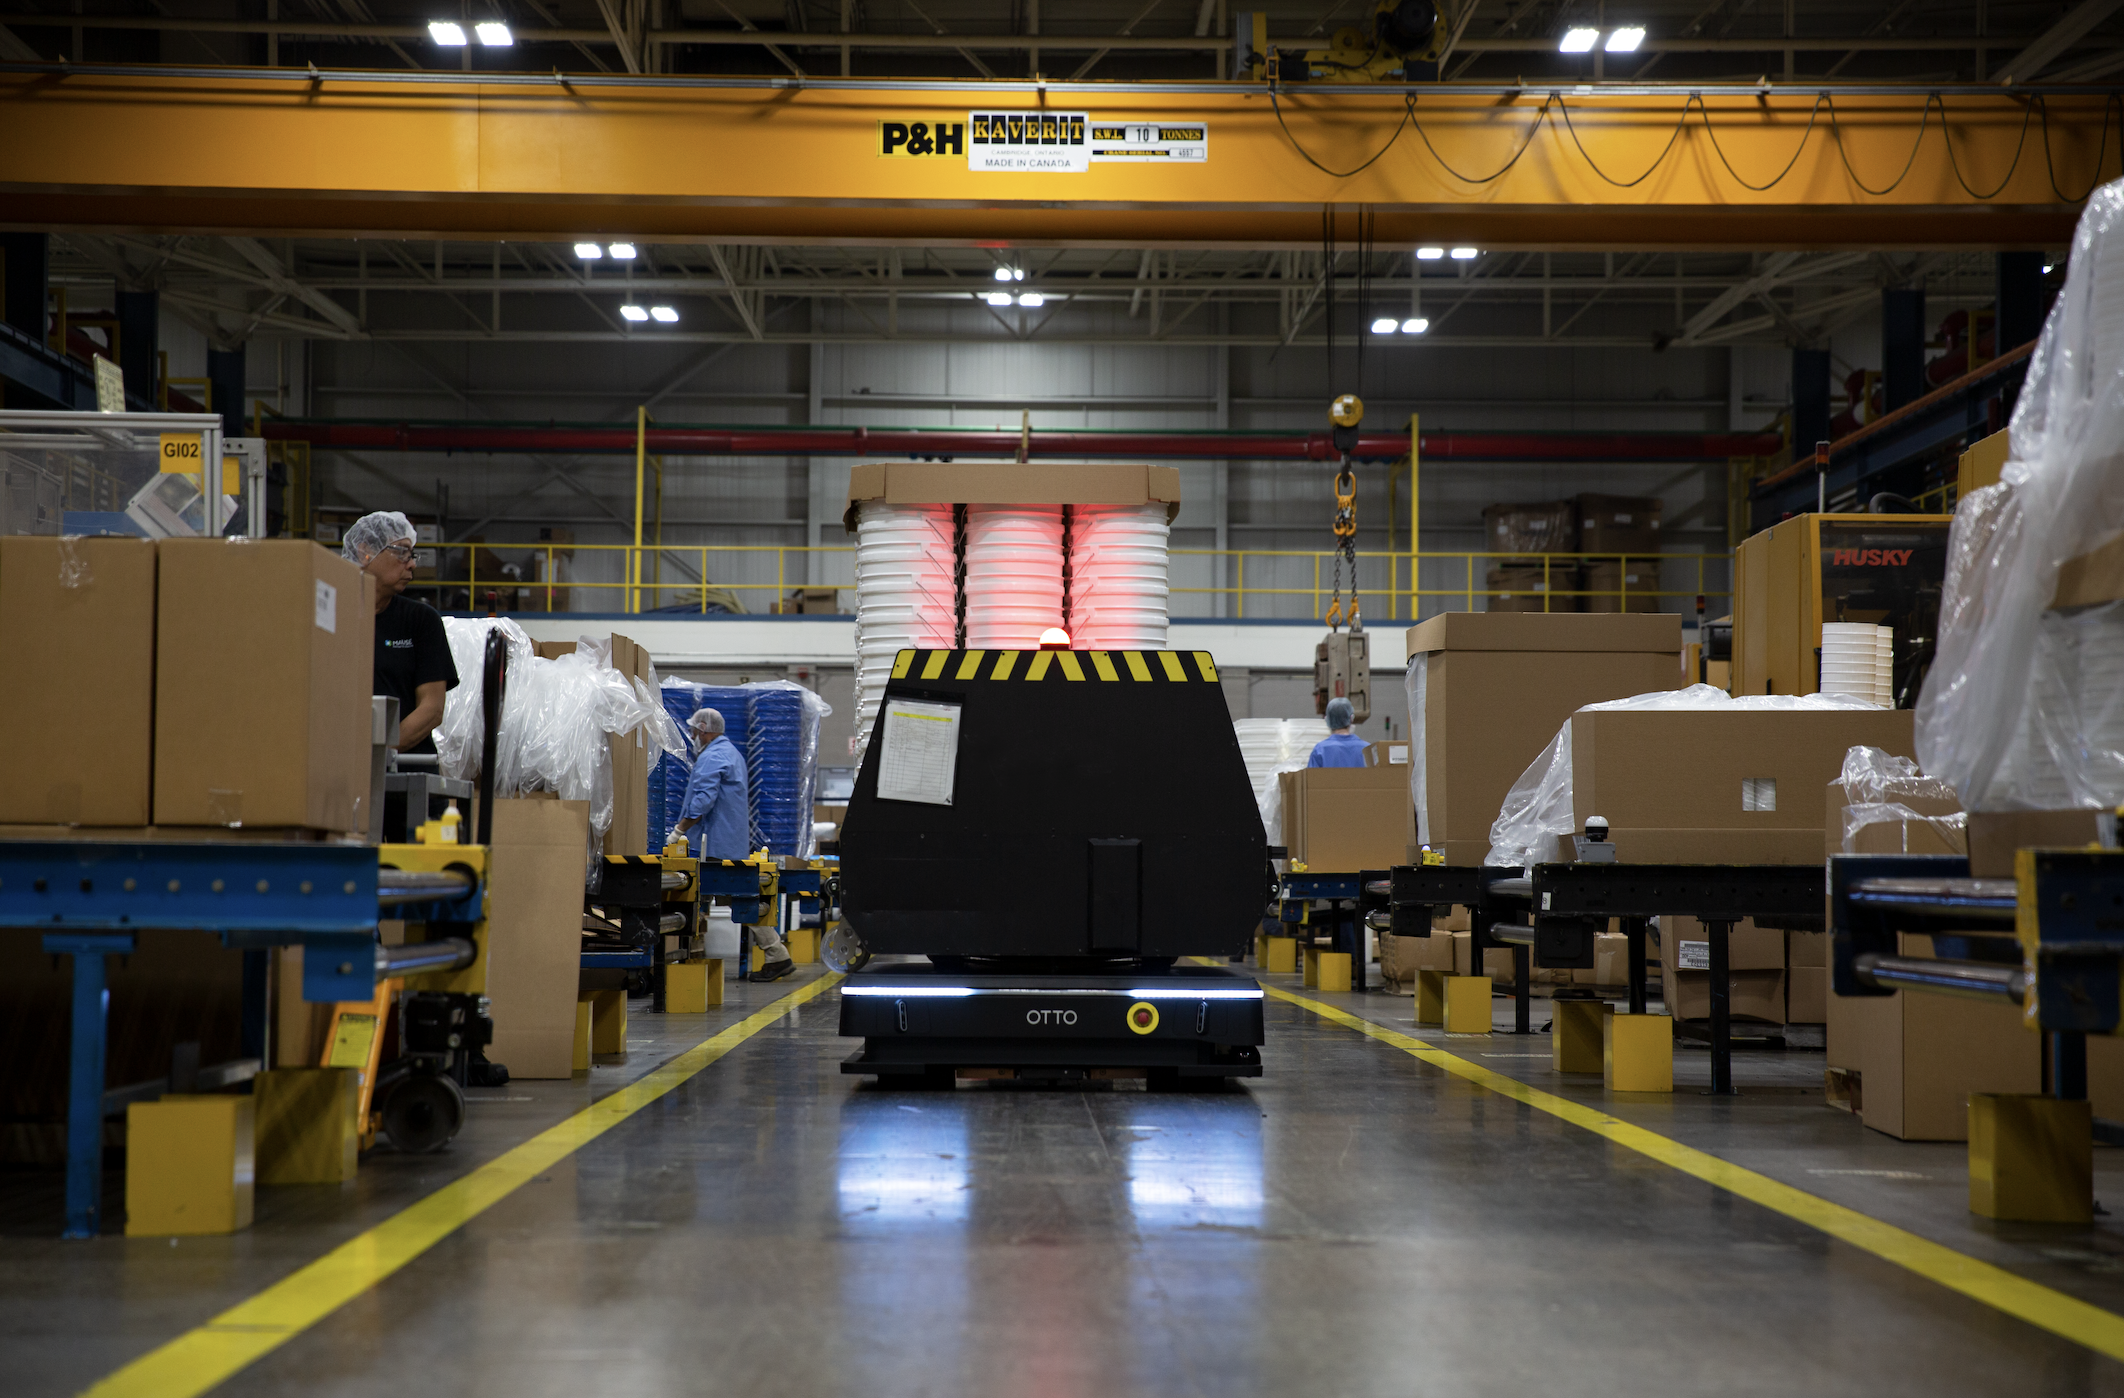 Image 1: OTTO AMRs increase productivity by allowing highly skilled laborers to transport materials from their workstations, without doing the dull and dangerous work of lifting and moving materials throughout the facility. 